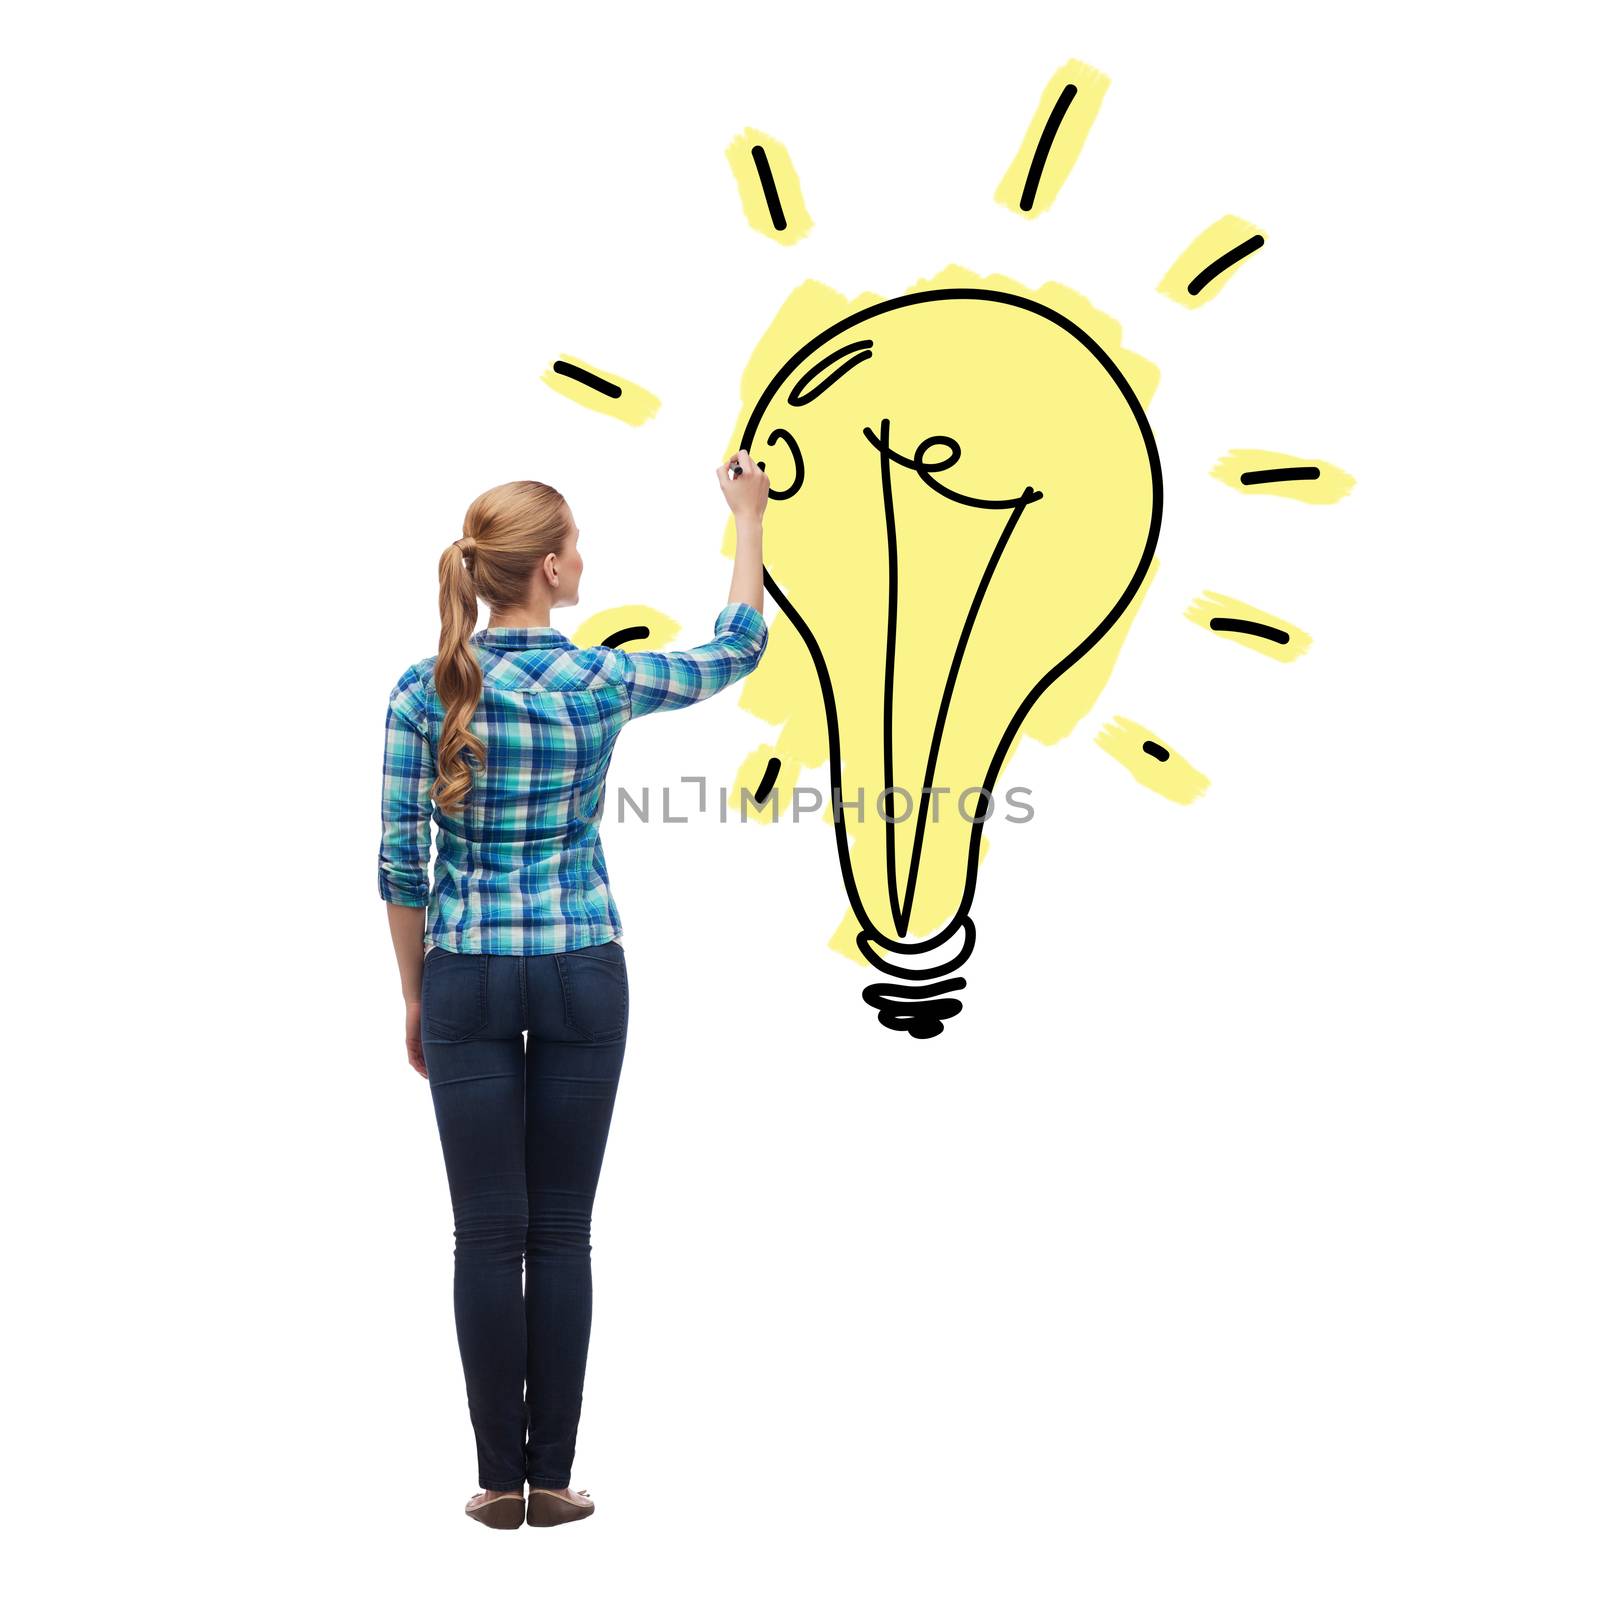 education and advertising concept - young woman from the back drawing light bulb in the air